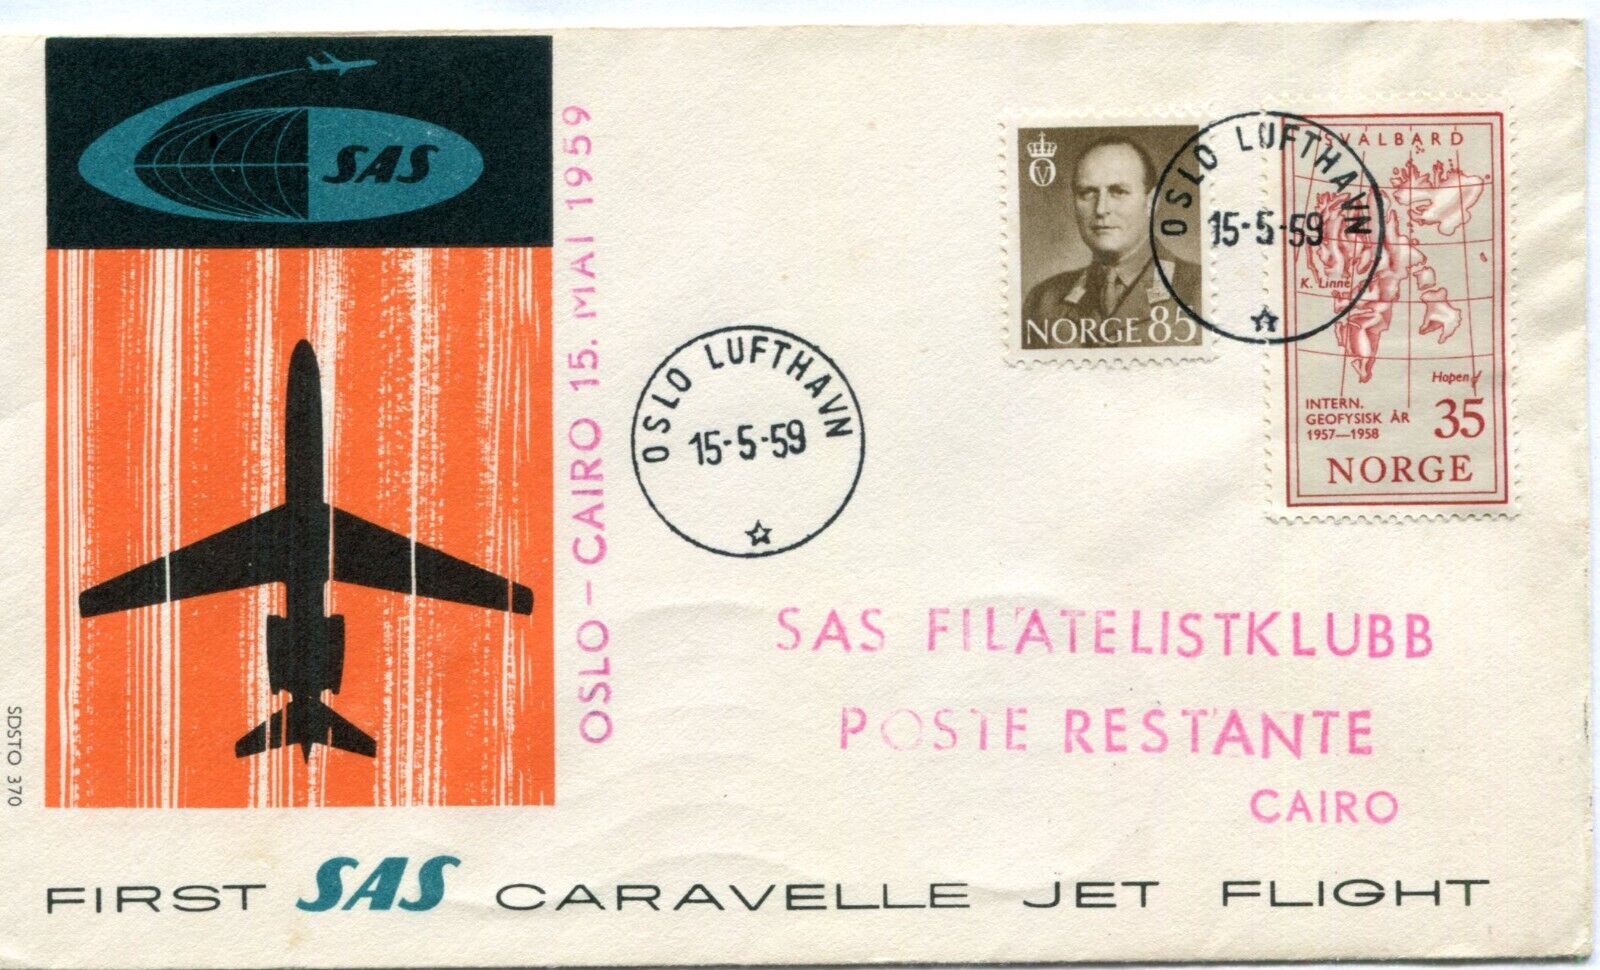 NORWAY  (S539) 1959 cover FIRST FLIGHT SAS CARAVELLE JET to CAIRO EGYPT